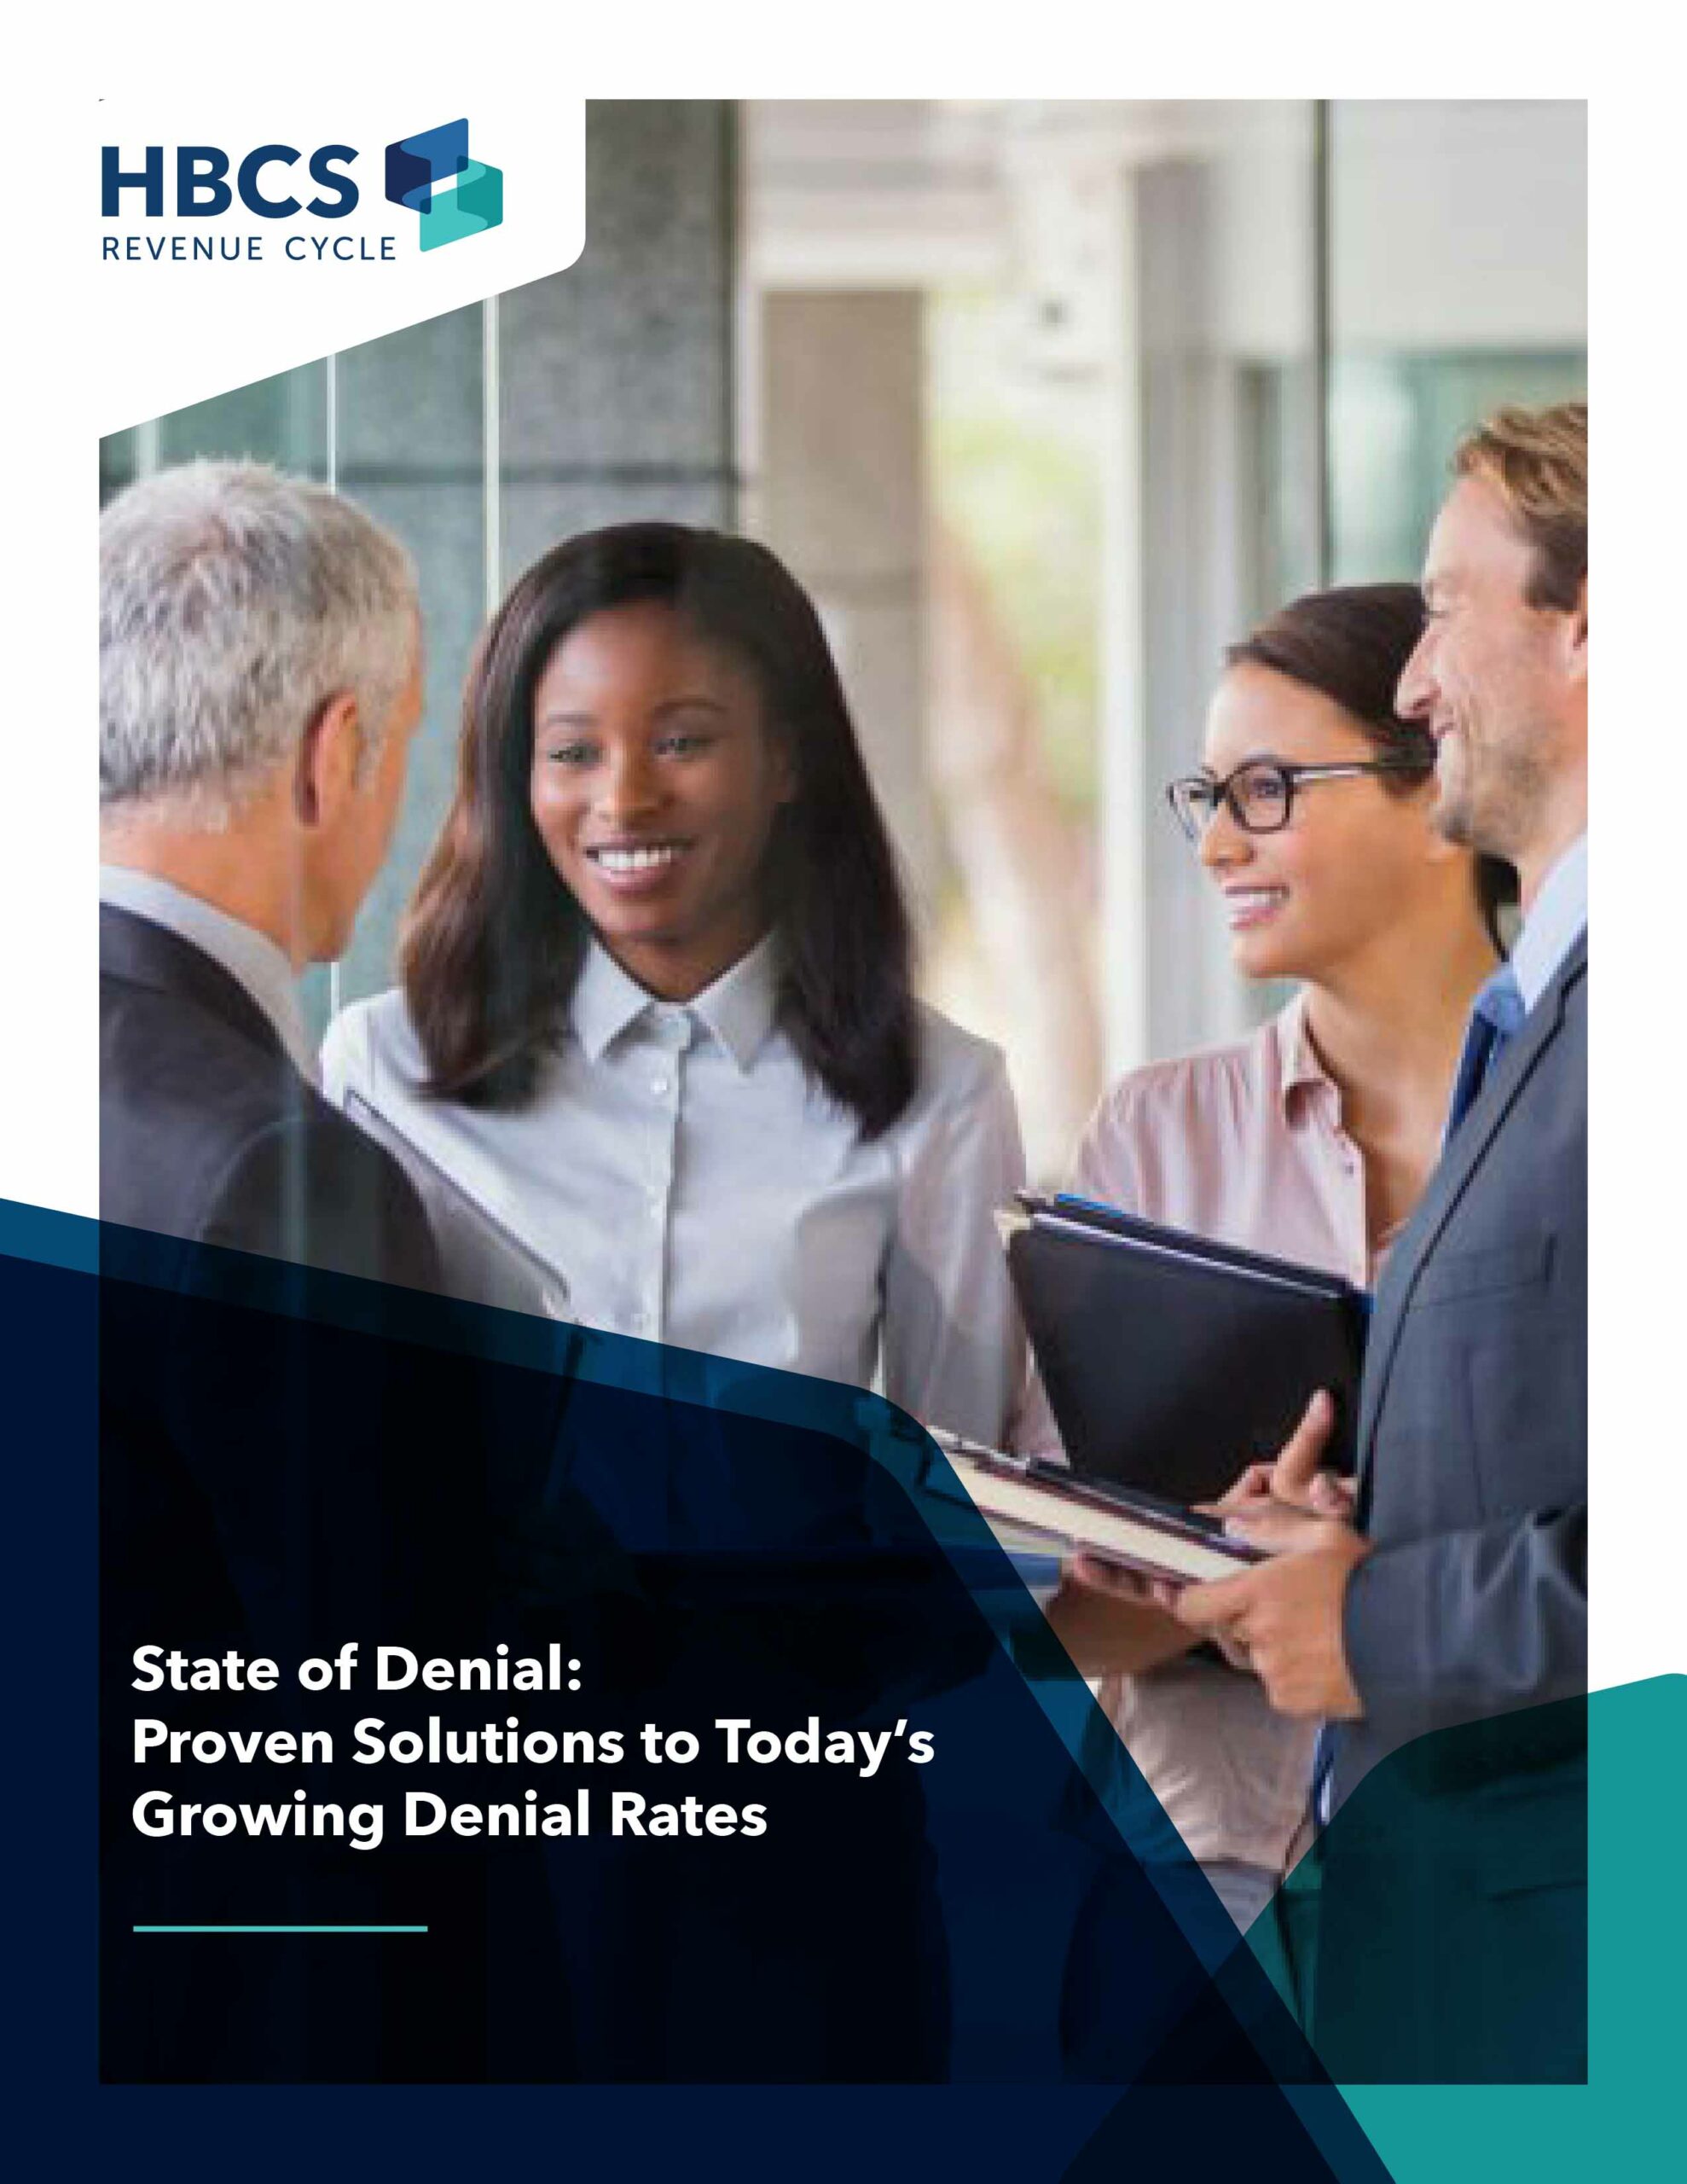 State of Denial: Proven Solutions to Today’s Growing Denial Rates